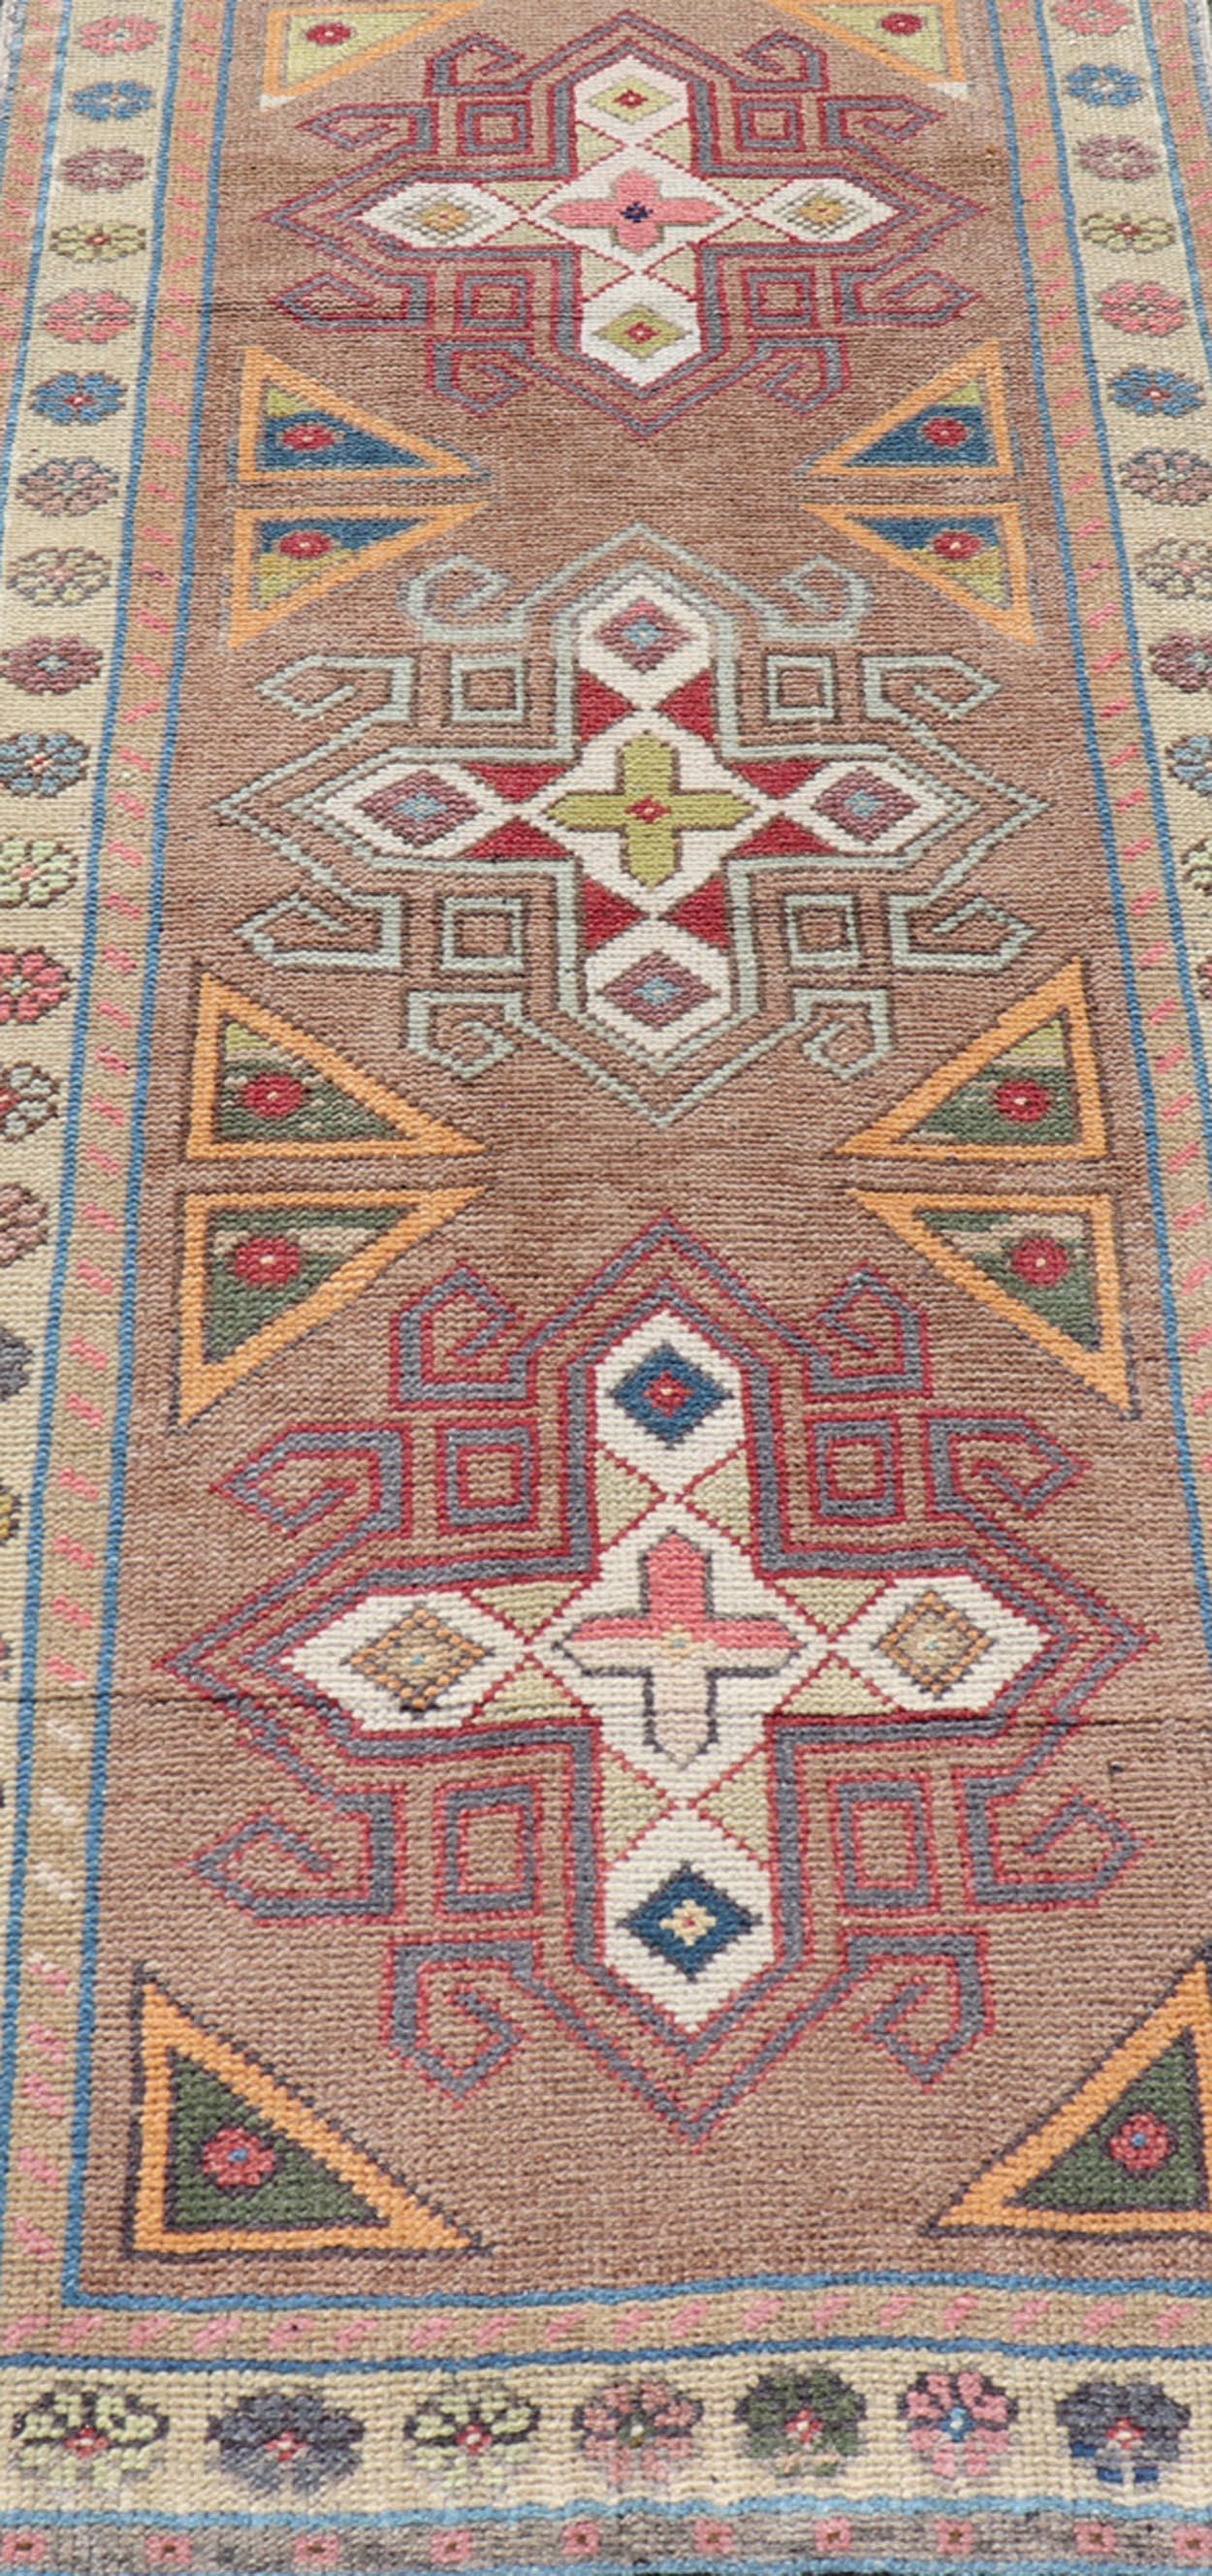 Measures: 2'7 x 5'9 
Vintage Turkish Oushak Geometric Cross Medallion's With Floral Border. Keivan Woven Arts / rug TU-MTU-910, country of origin / type: Turkey / Oushak, circa 1940.

This vintage small rug, from 1940s features an assortment of